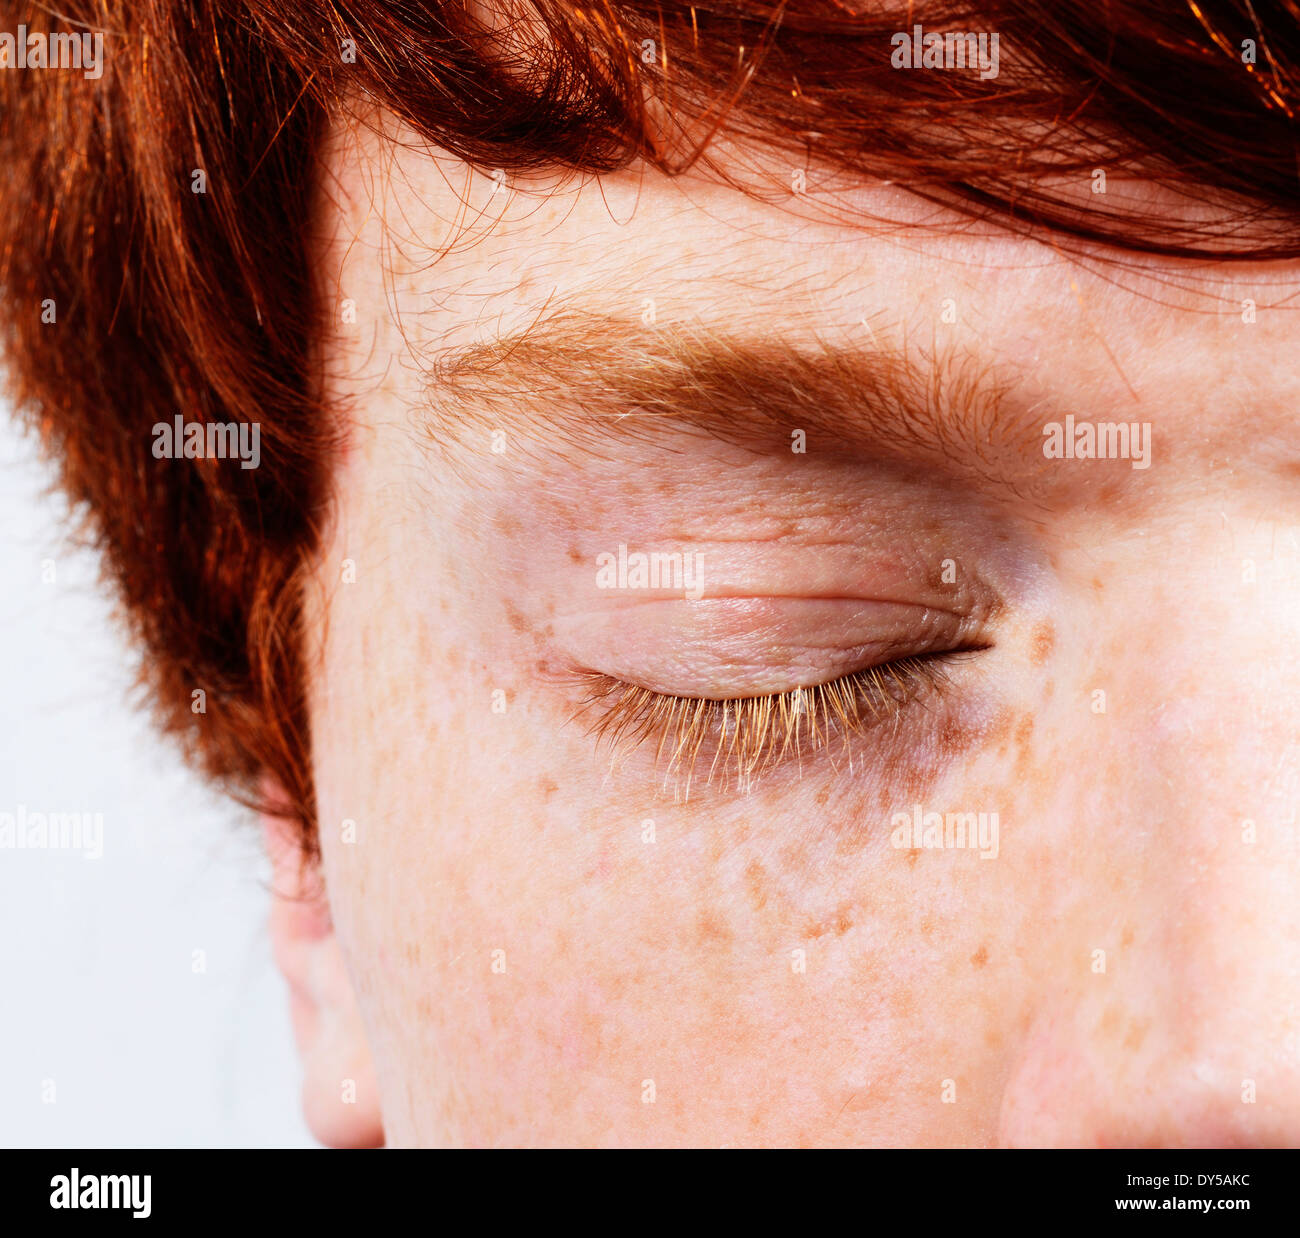 Partial facial shot of young man with red hair and freckles, eyes closed Stock Photo